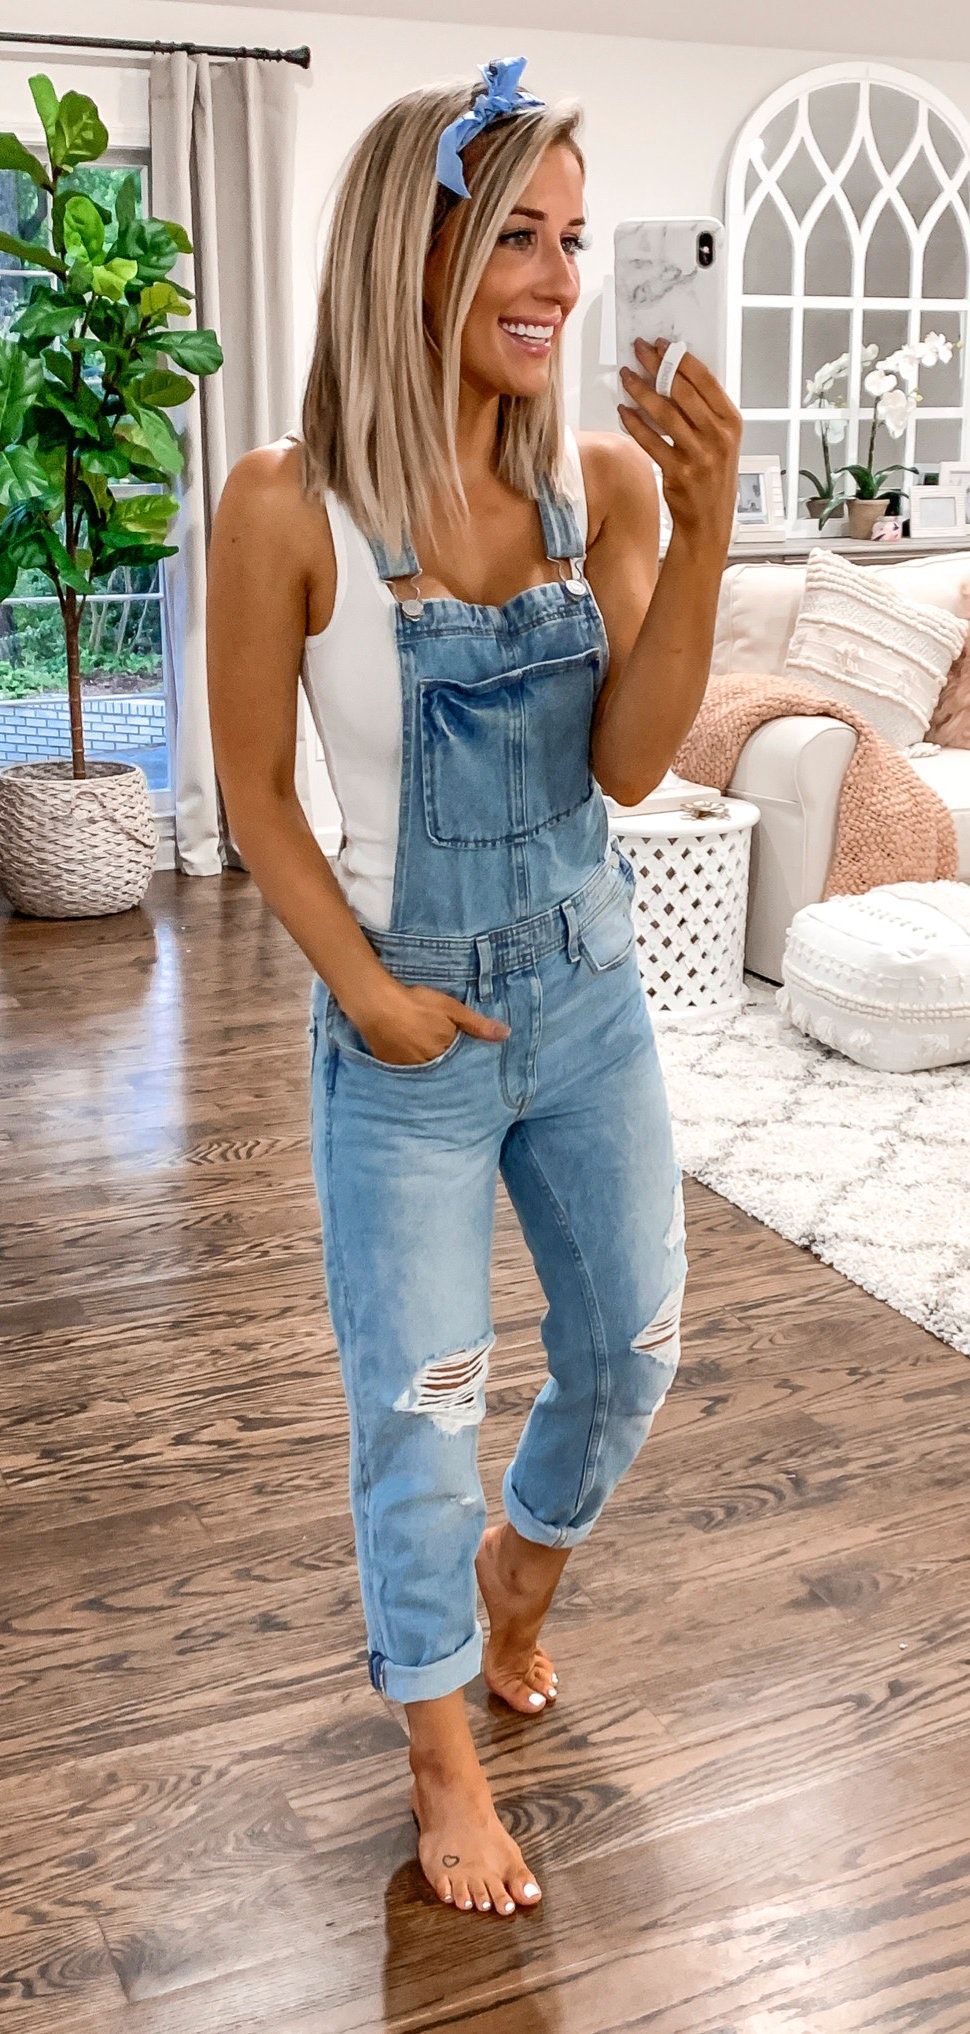 10 Awesome Summer Outfits for Women that always looks Casually Fantastic - 10 Awesome Summer Outfits for Women that always looks Casually Fantastic -   19 style Girl summer ideas